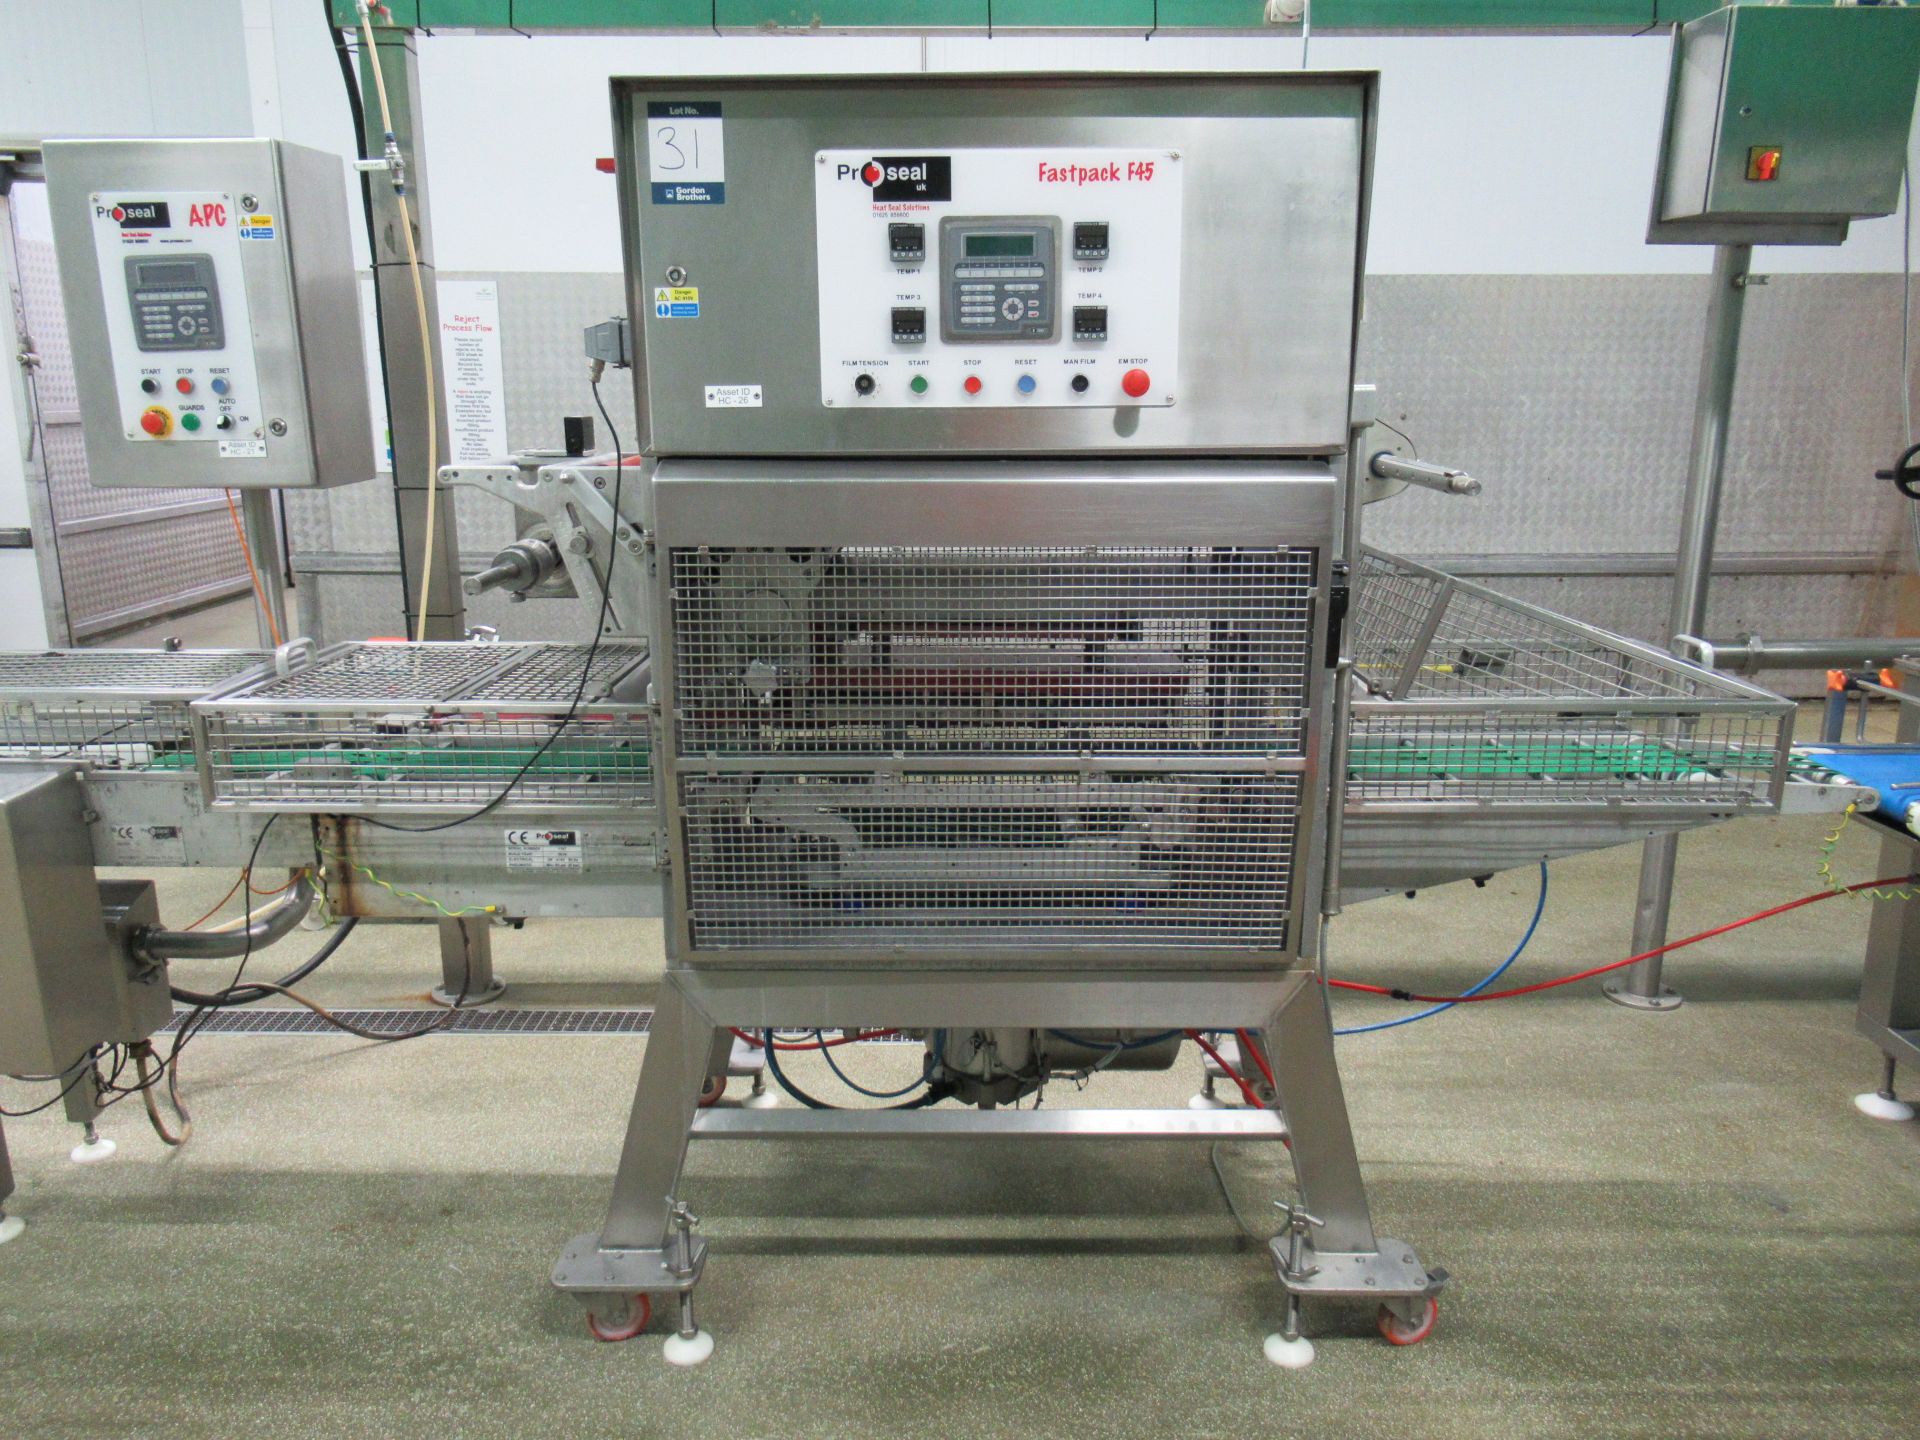 Proseal Fastpack F45 automatic inline tray sealer. Serial no: 1197 (2014) pneumatic and servo